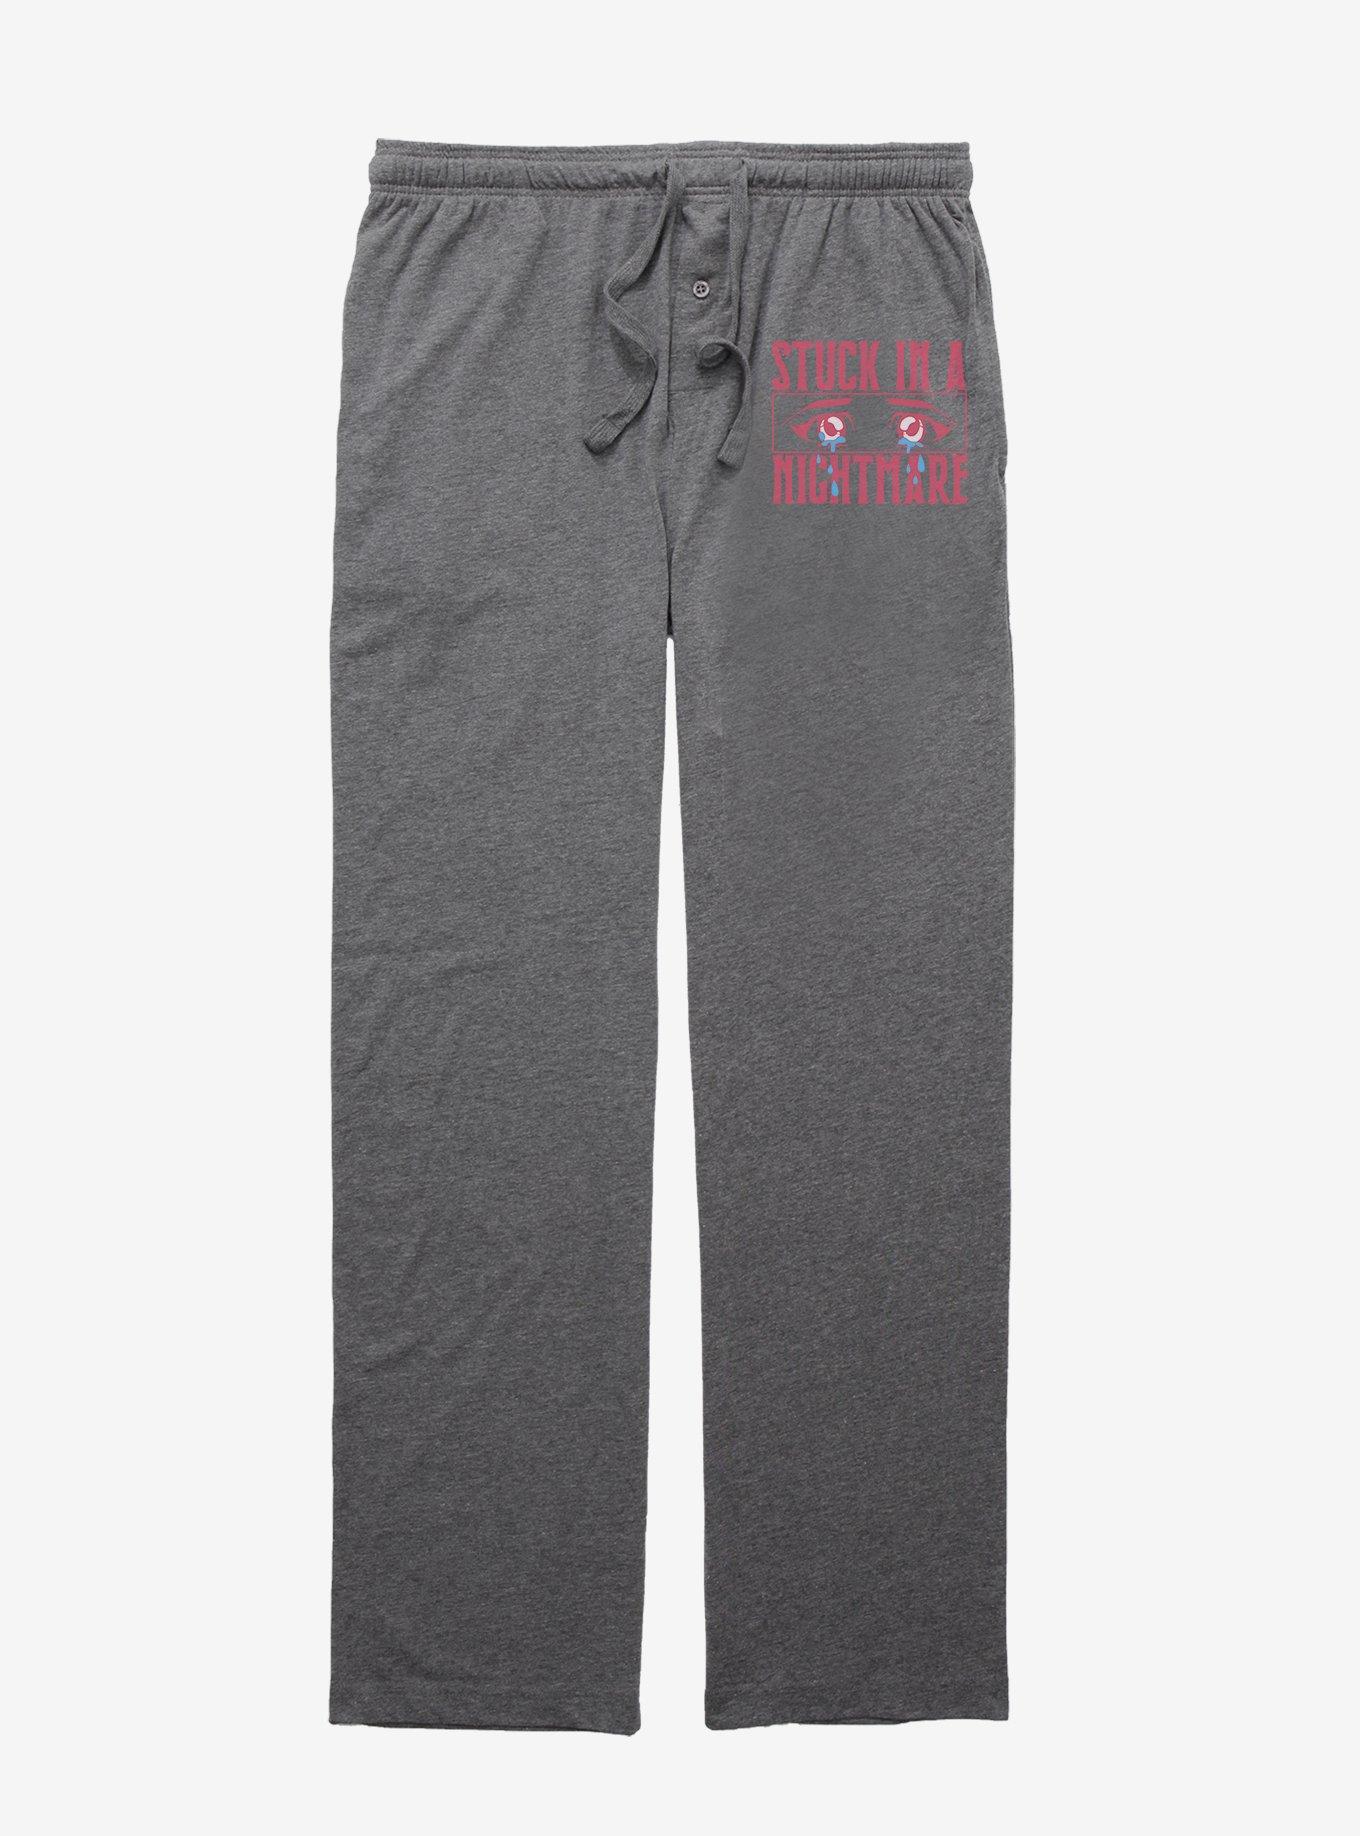 Cozy Collection Stuck In A Nightmare Pajama Pants, GRAPHITE HEATHER, hi-res